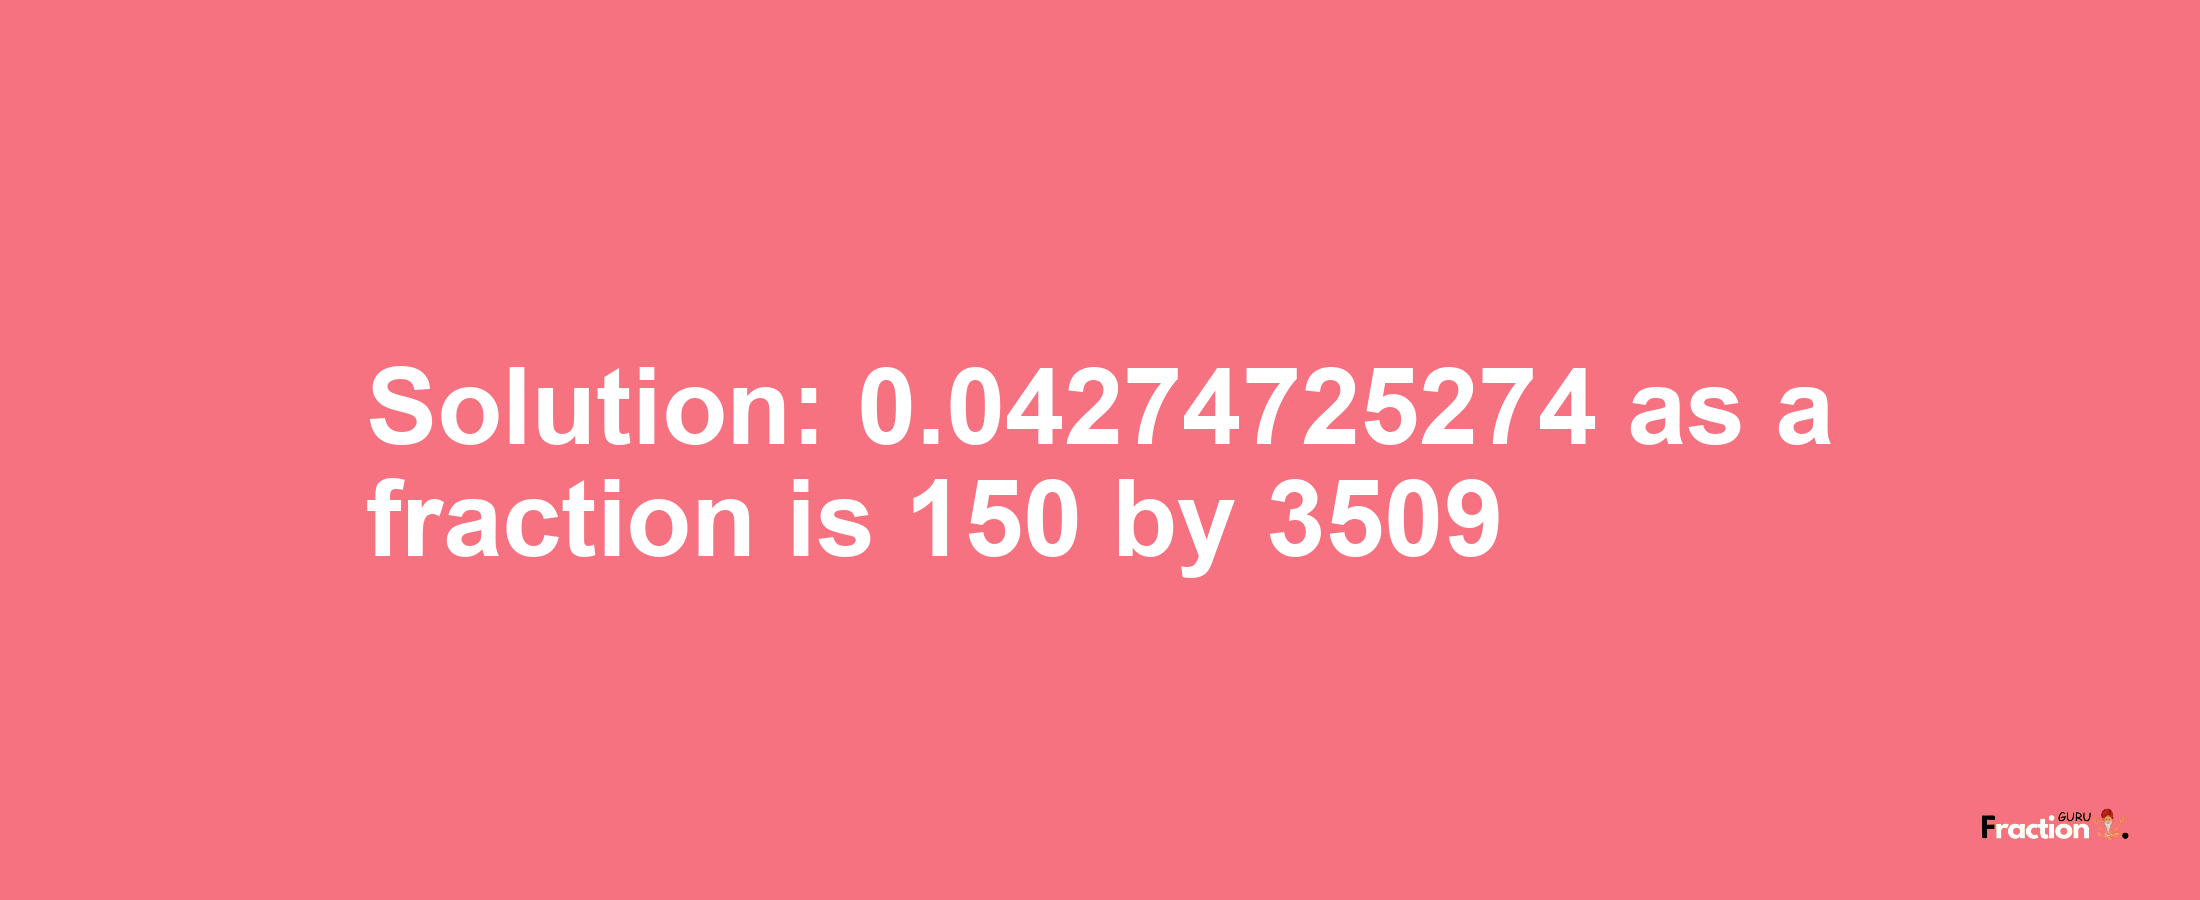 Solution:0.04274725274 as a fraction is 150/3509